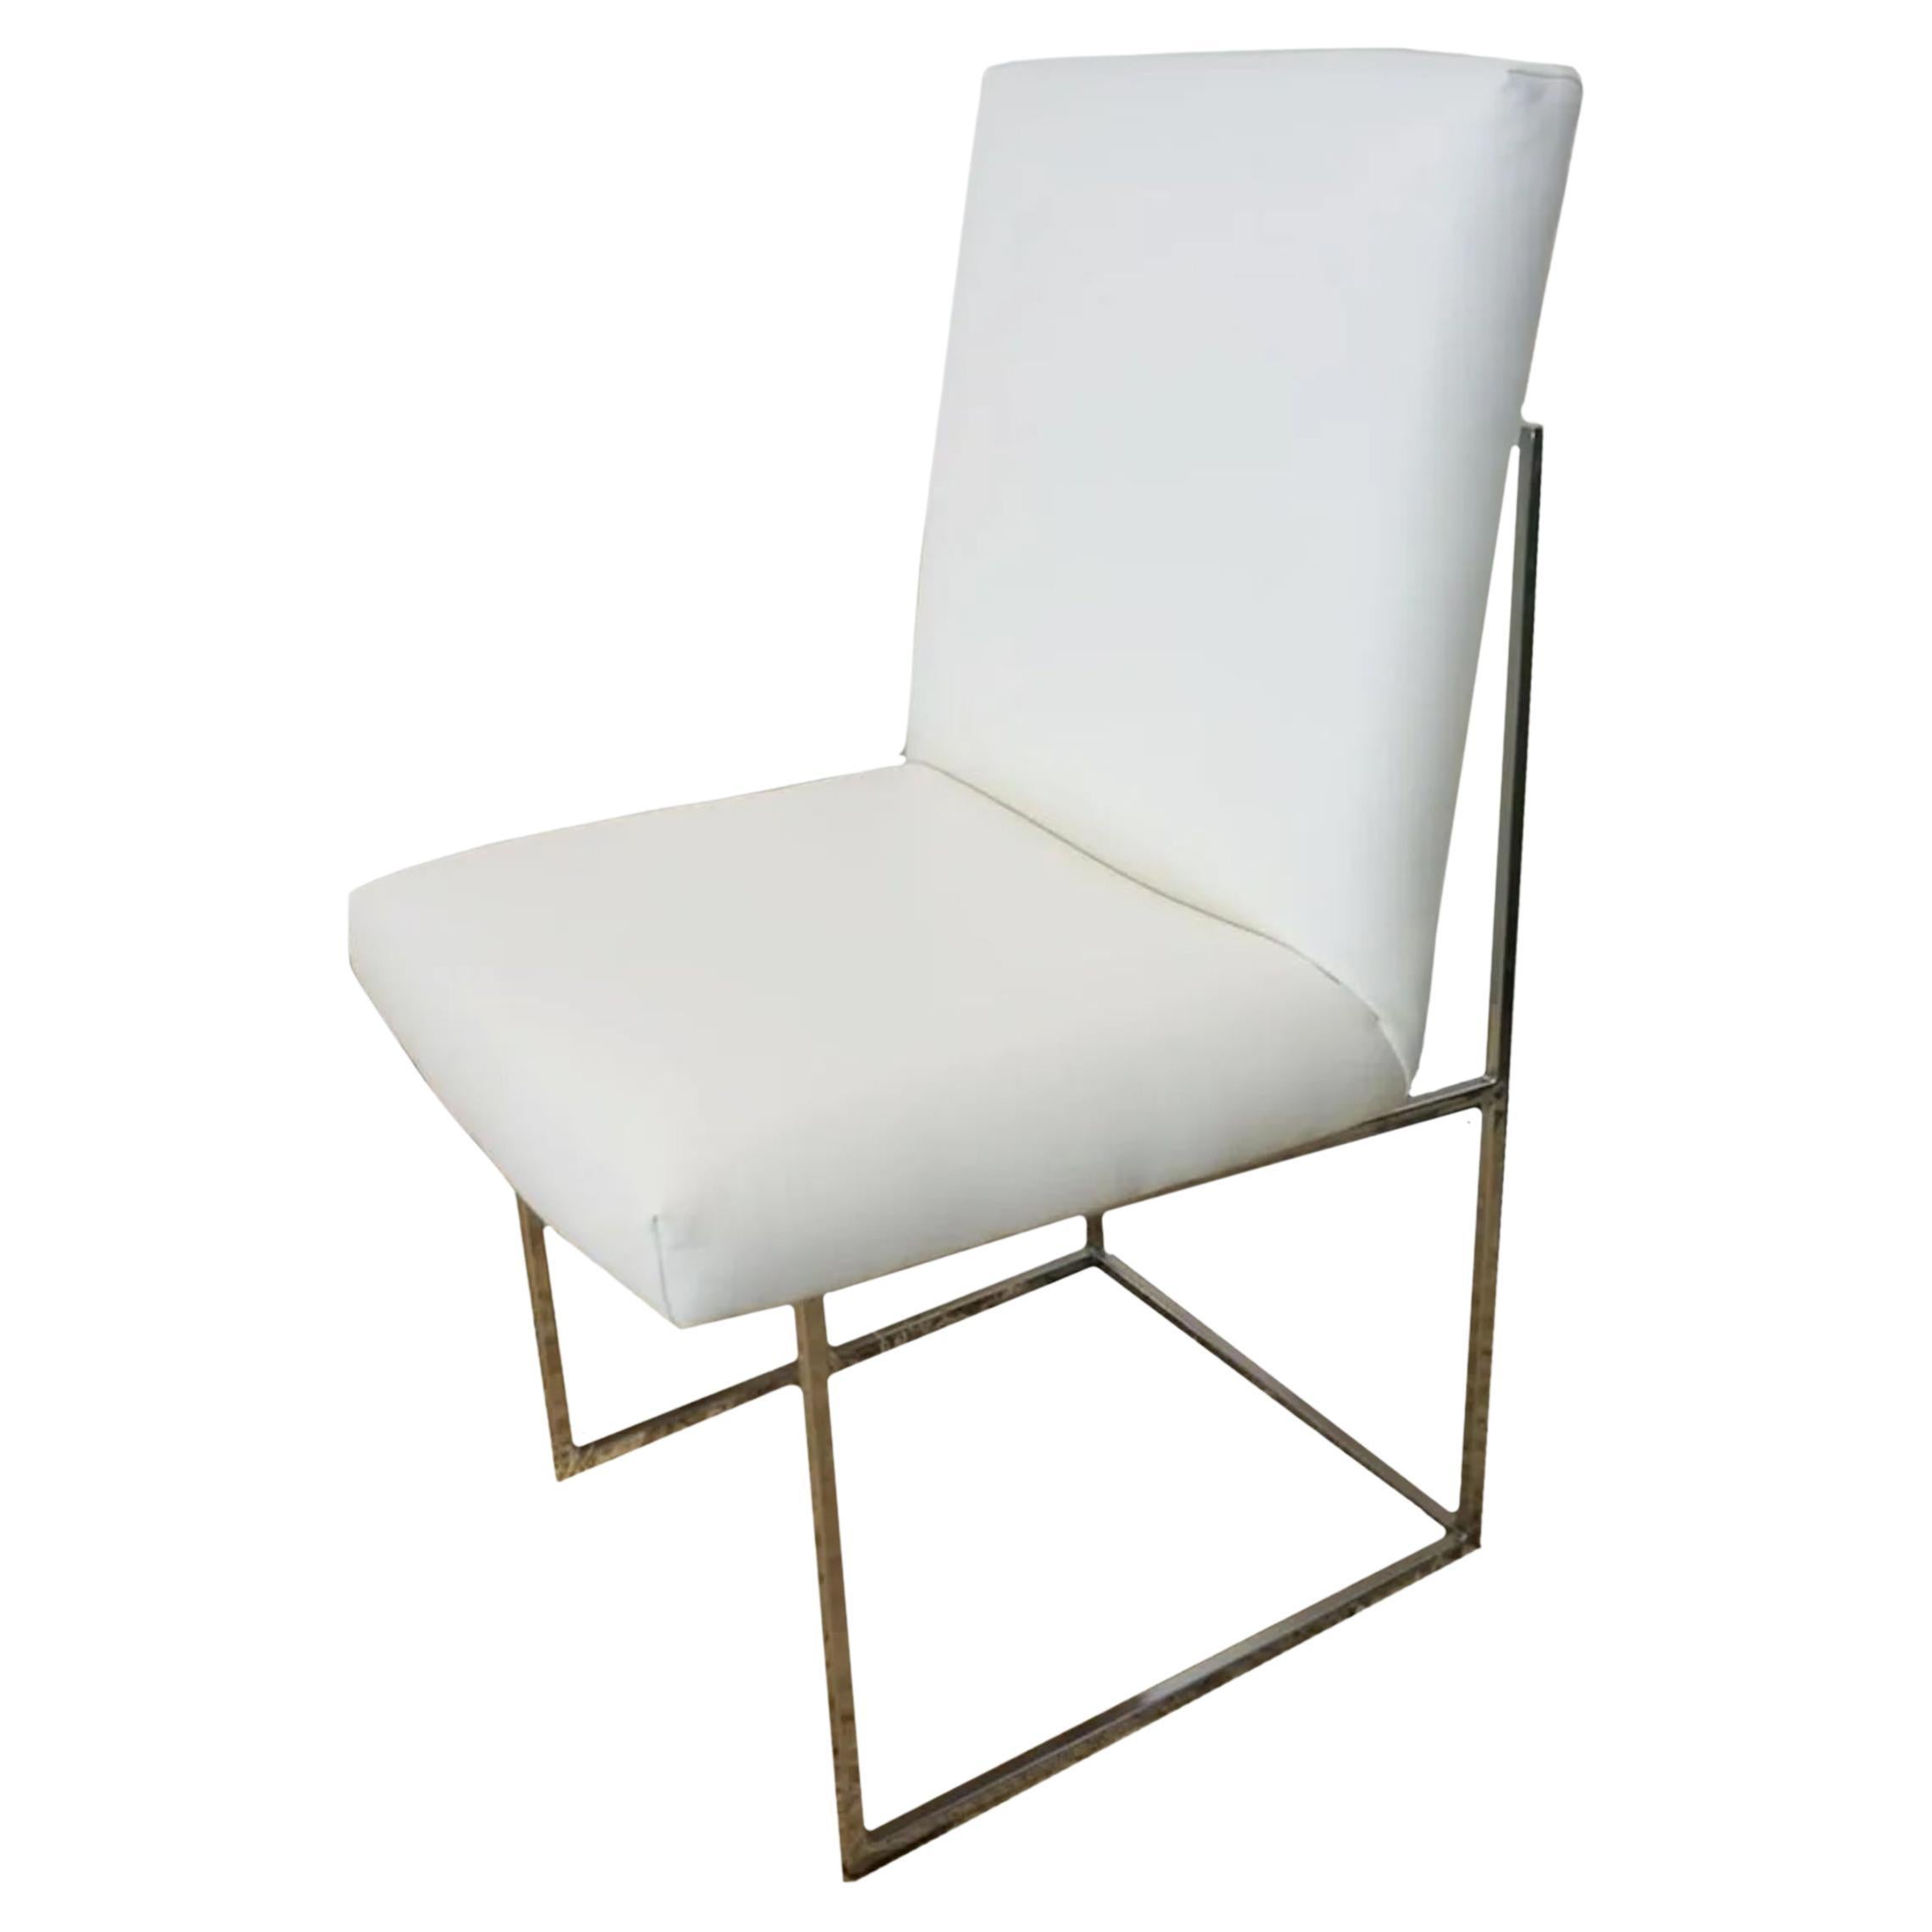 A set of 6 1970s dining chairs, model 1187, designed by Milo Baughman for Thayer Coggin. These chairs feature an open chrome plated steel frame with a fully upholstered seat and backrest. The frames are clean. The upholstery is bright white leather